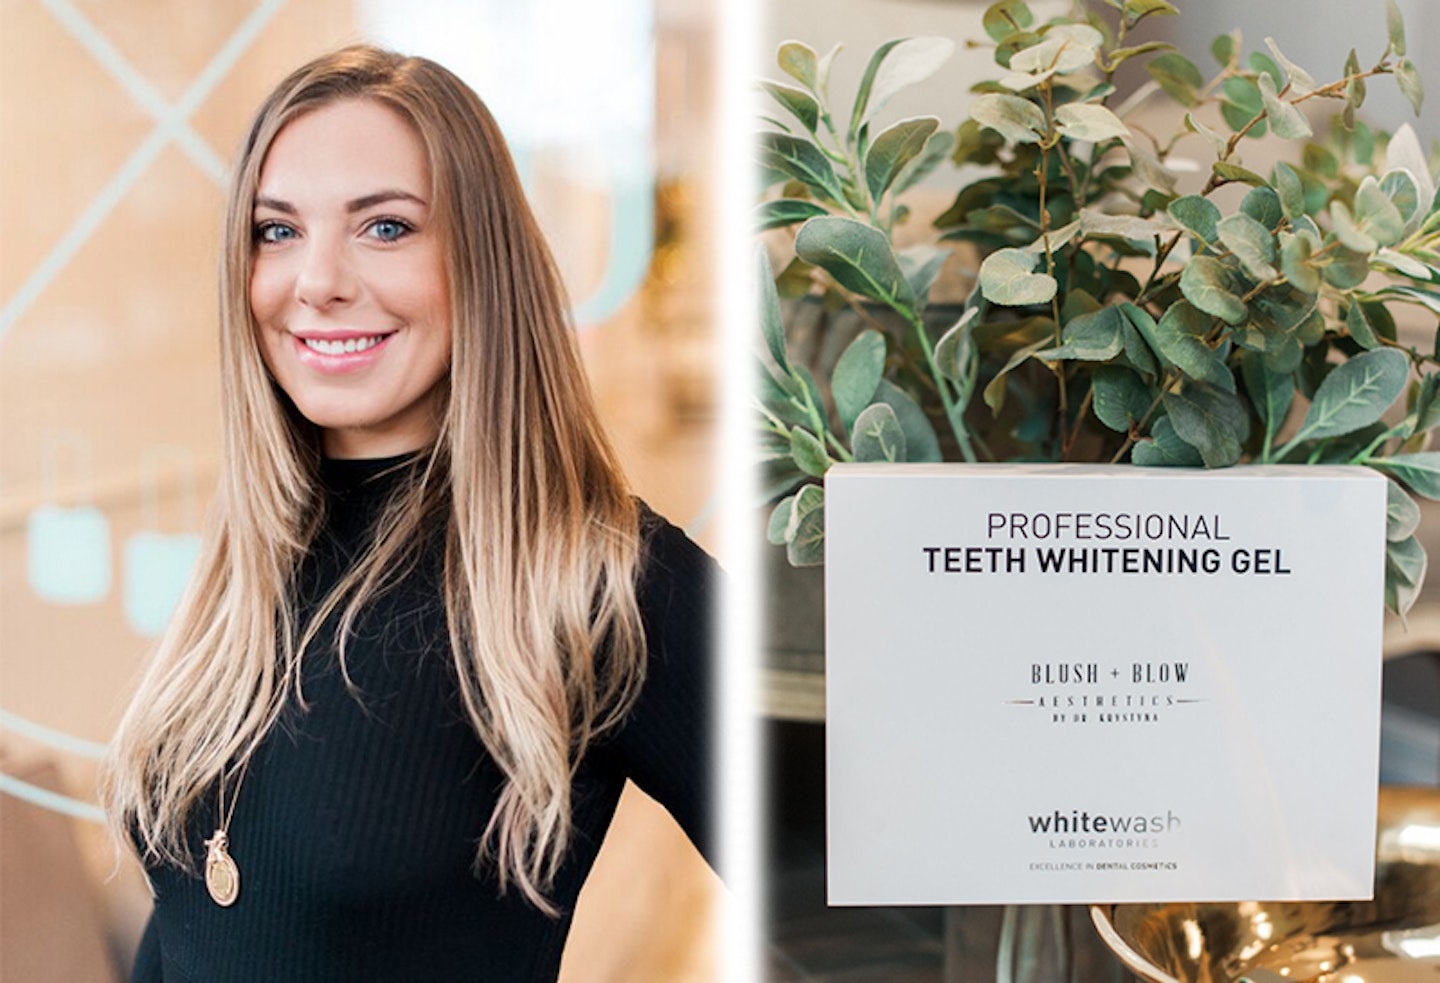 We asked Dr Kristina how to get really white teeth (and why you shouldn’t try DIY kits)